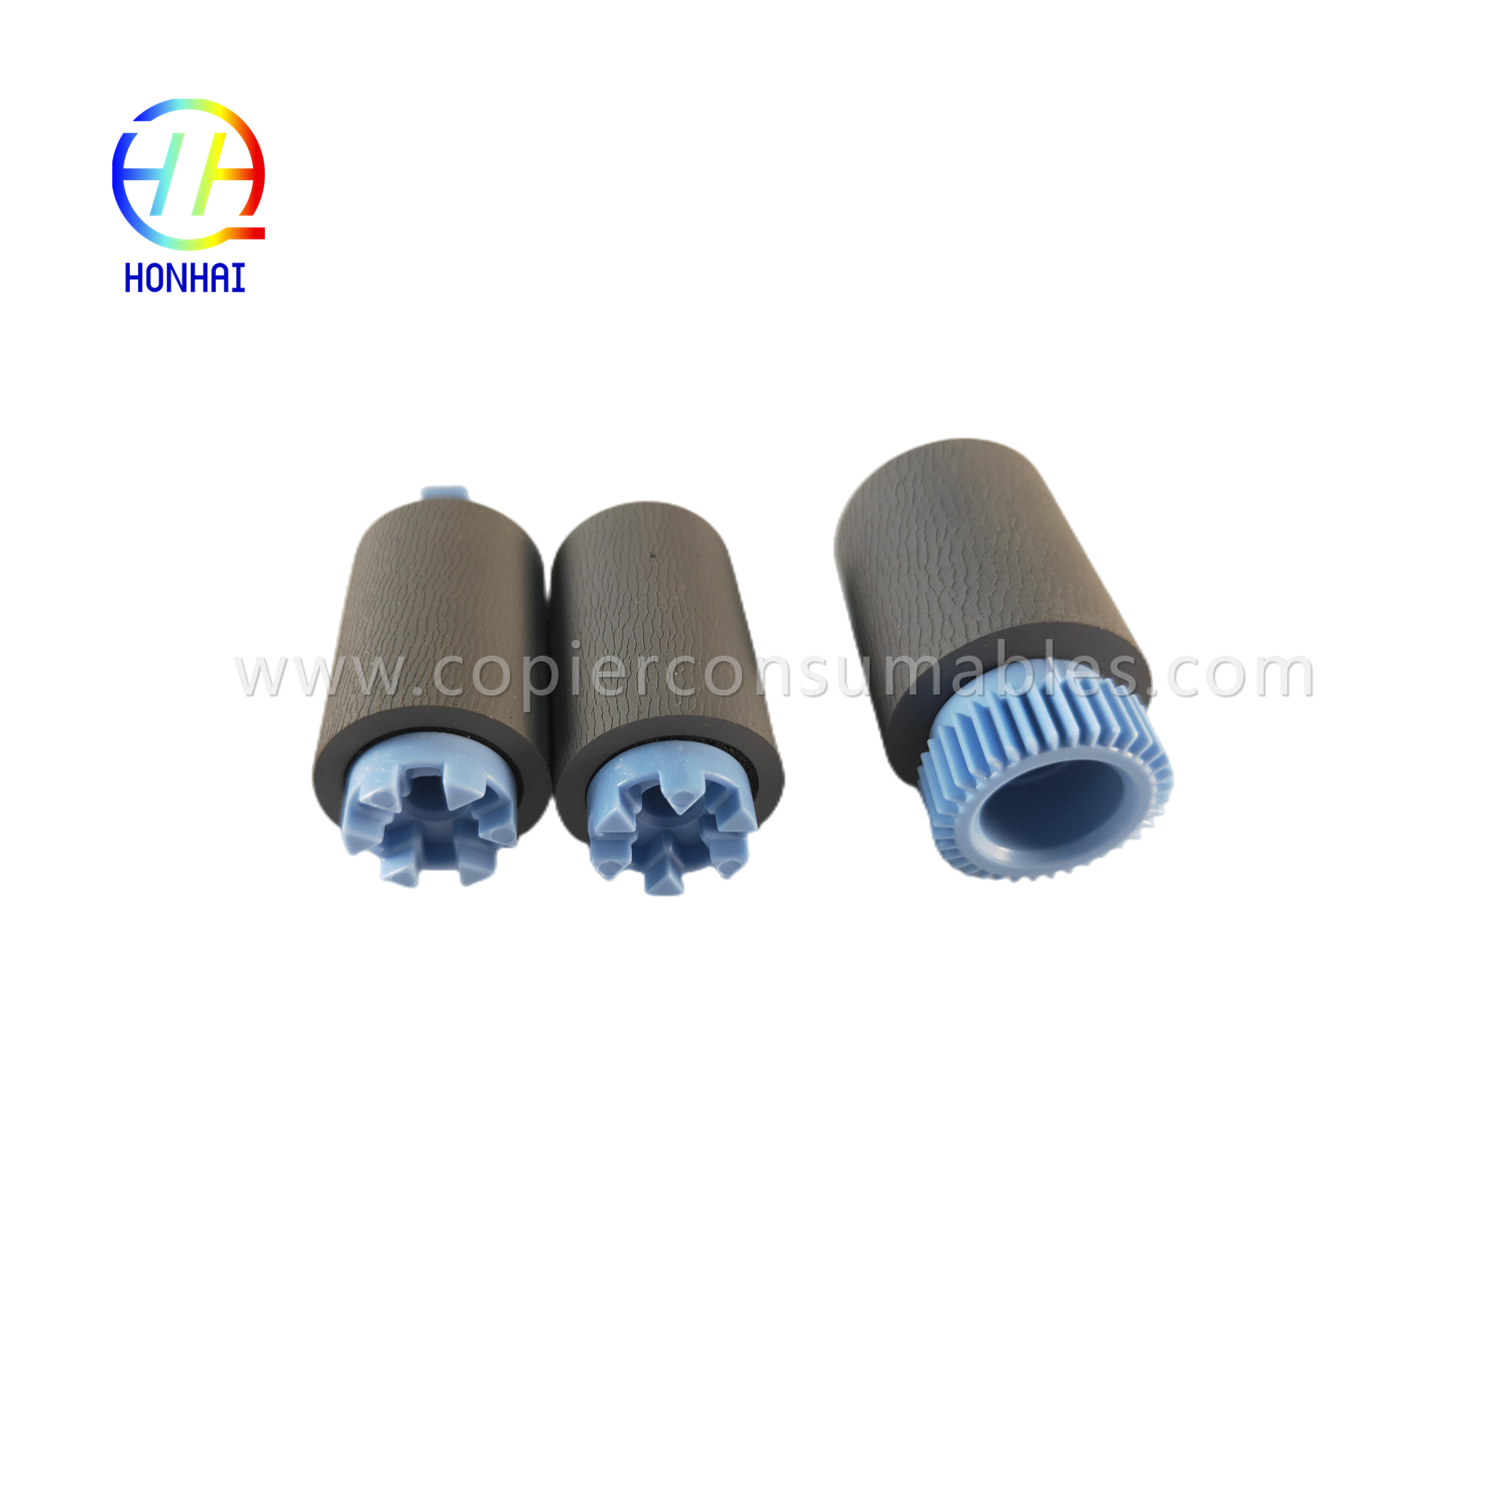 https://c585.goodao.net/tray-2-5-pickup-feed-separation-roller-set-for-hp-a7w93-67082-mfp-785f-780dn-e77650z-e77660z-e77650dn-e4082 p77750z-p77760z-p75050dn-p75050dw-product/